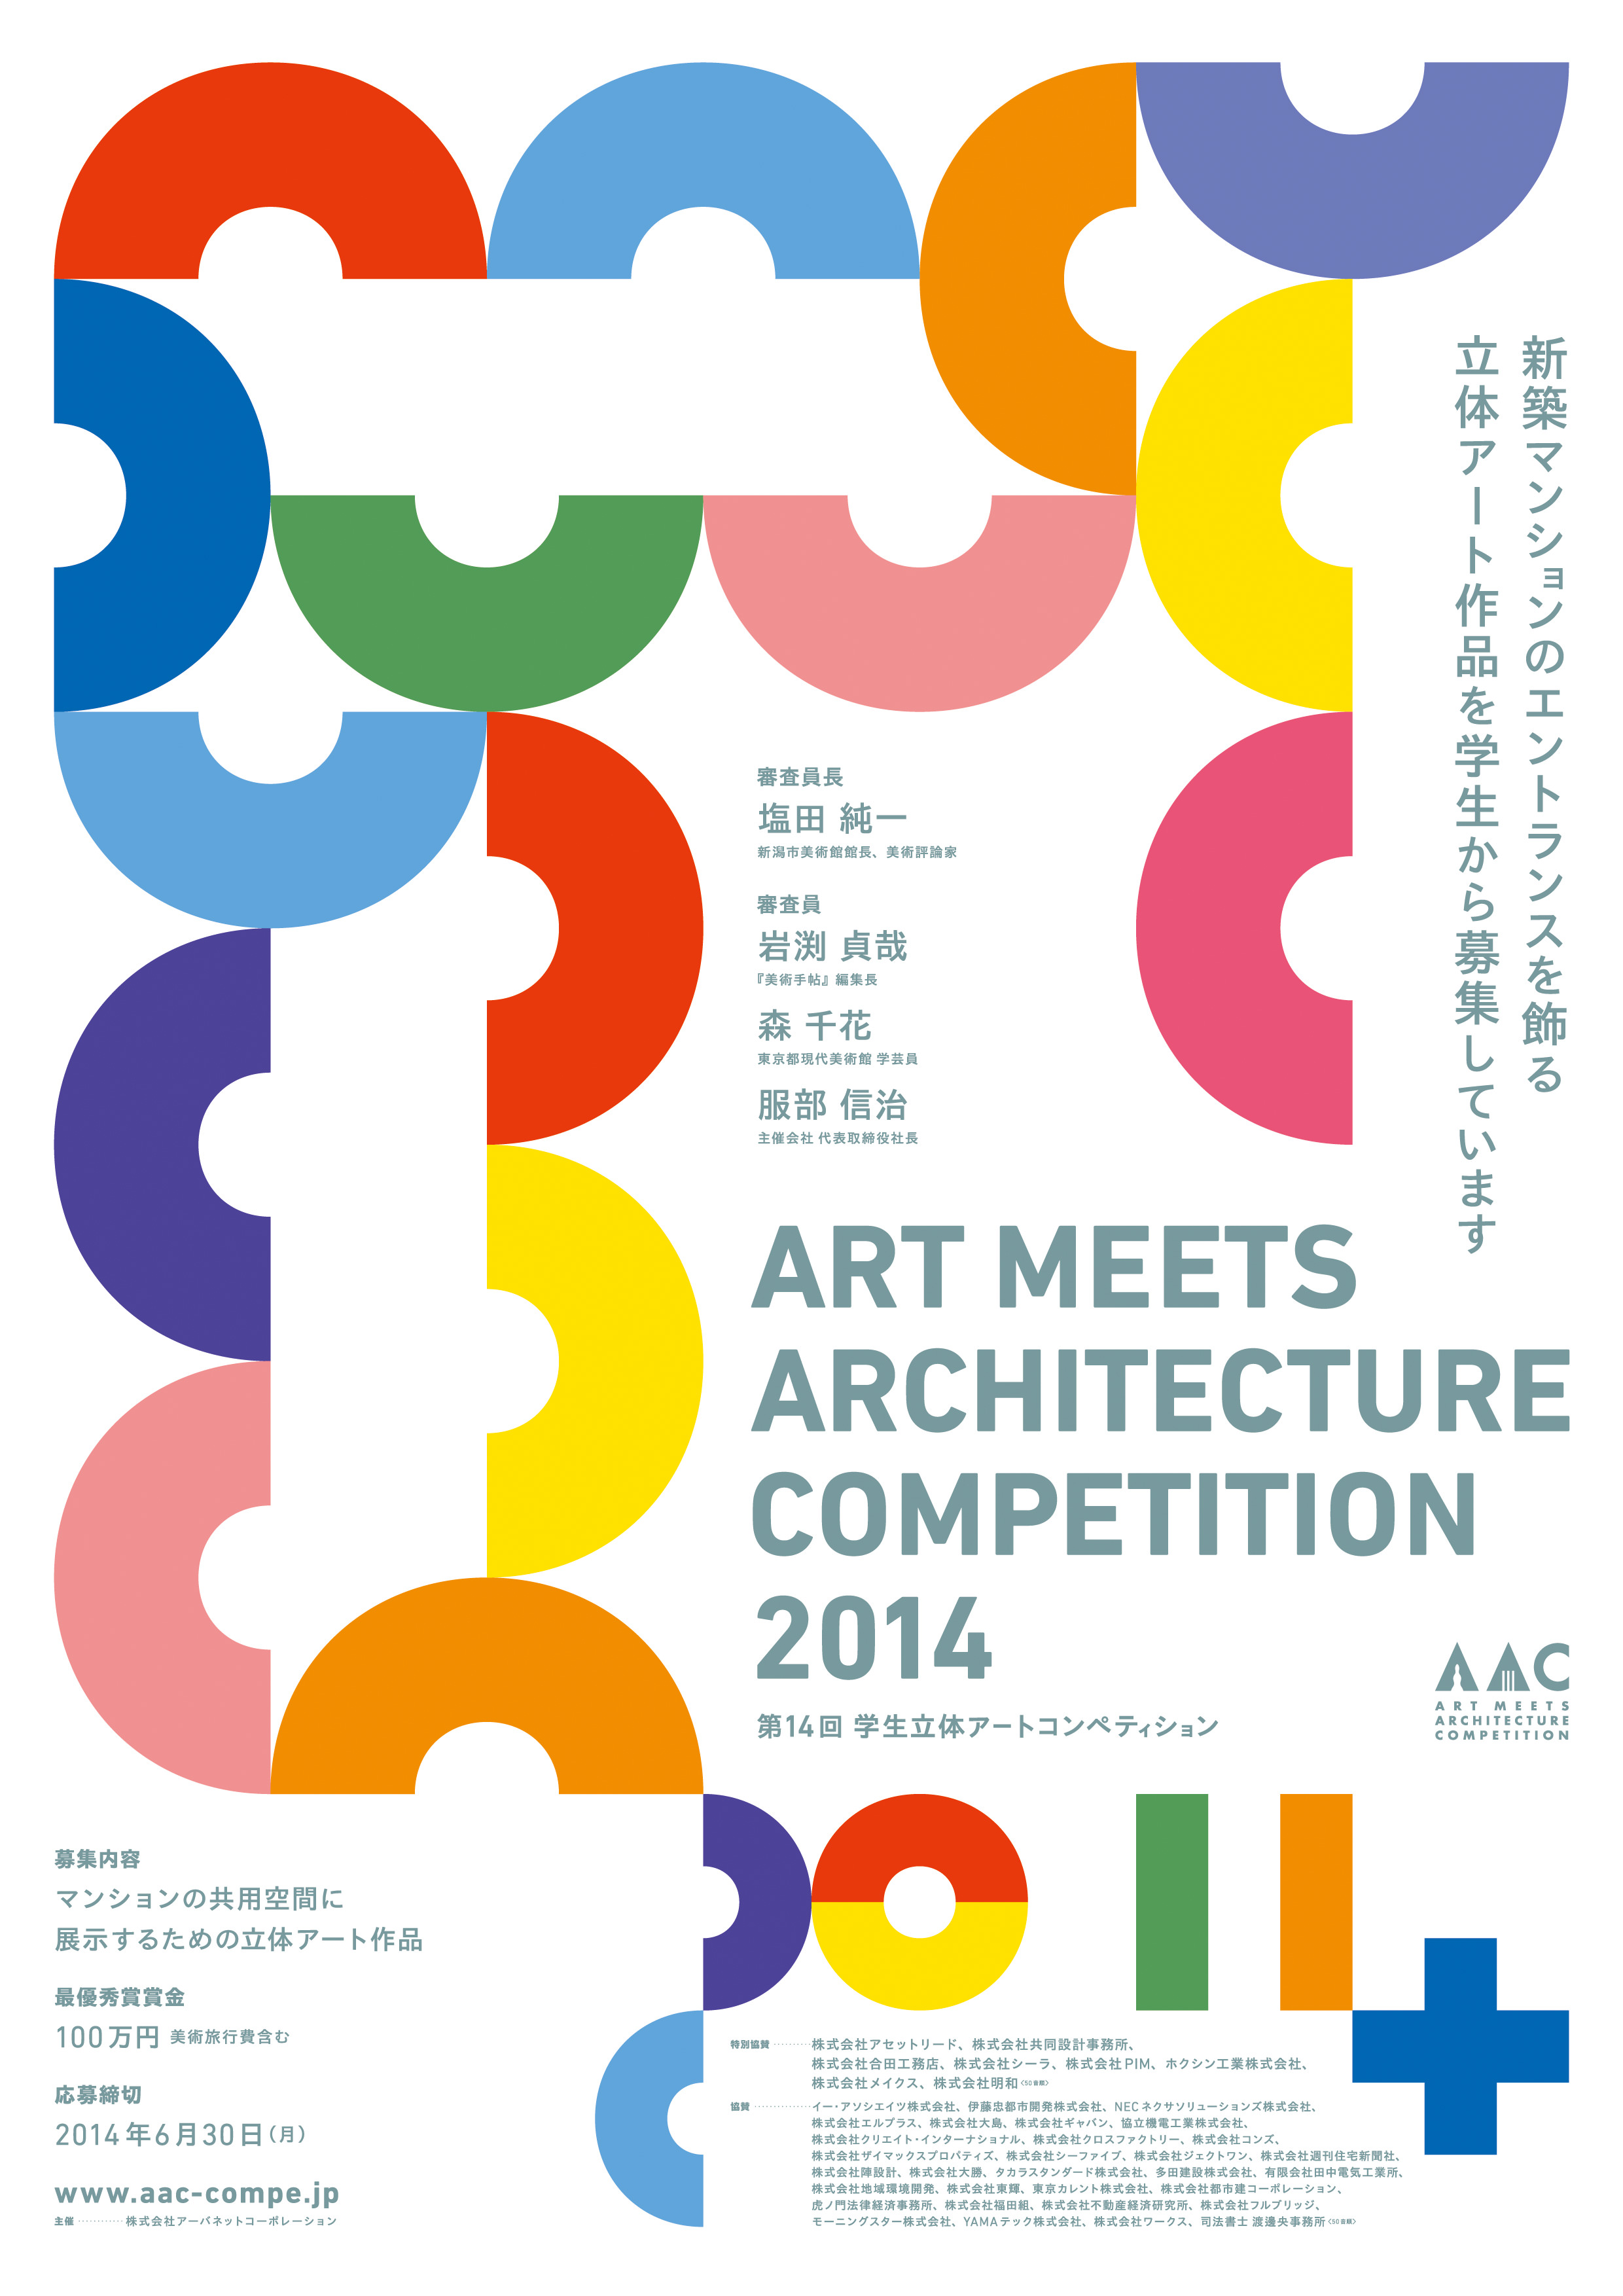 AAC Art Meets Architecture Competition